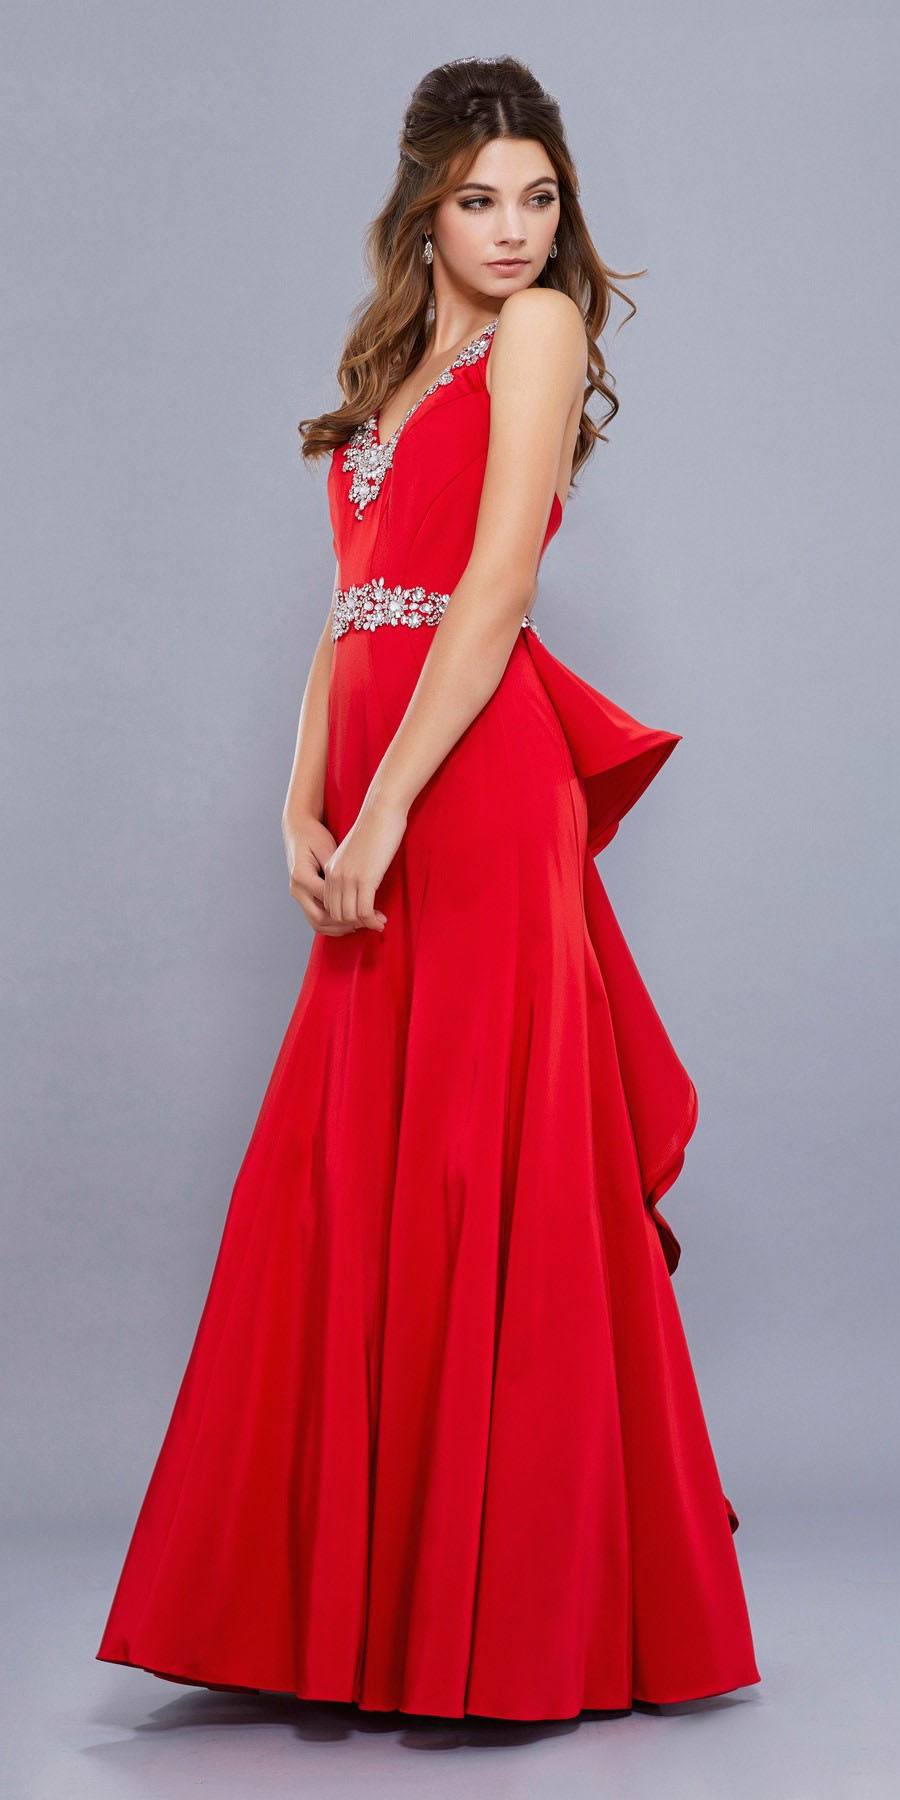 Embellished V-Neck Ruffled Cut-Out Back Mermaid Prom Dress Red